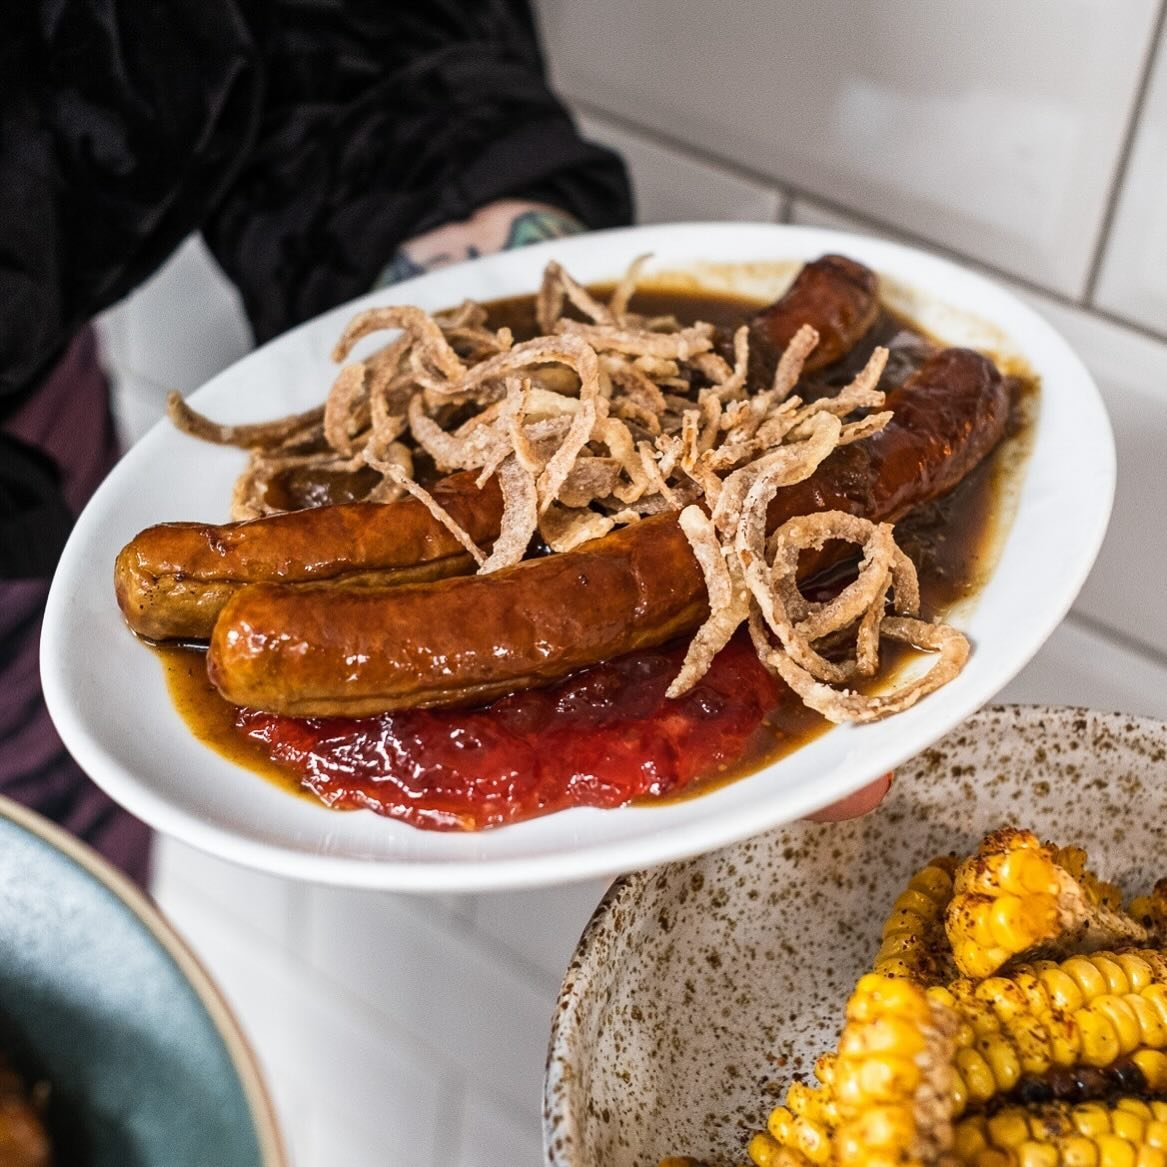 Save your charcoal&hellip; we&rsquo;ve got you 🪵 The suns been out for 5 minutes and we&rsquo;ve already turned the whole menu into a summer BBQ 🤣🥵

🌭 Lamb merguez, wild prune mustard &amp; house sauerkraut
🍗 Soy braised chicken leg with butterm